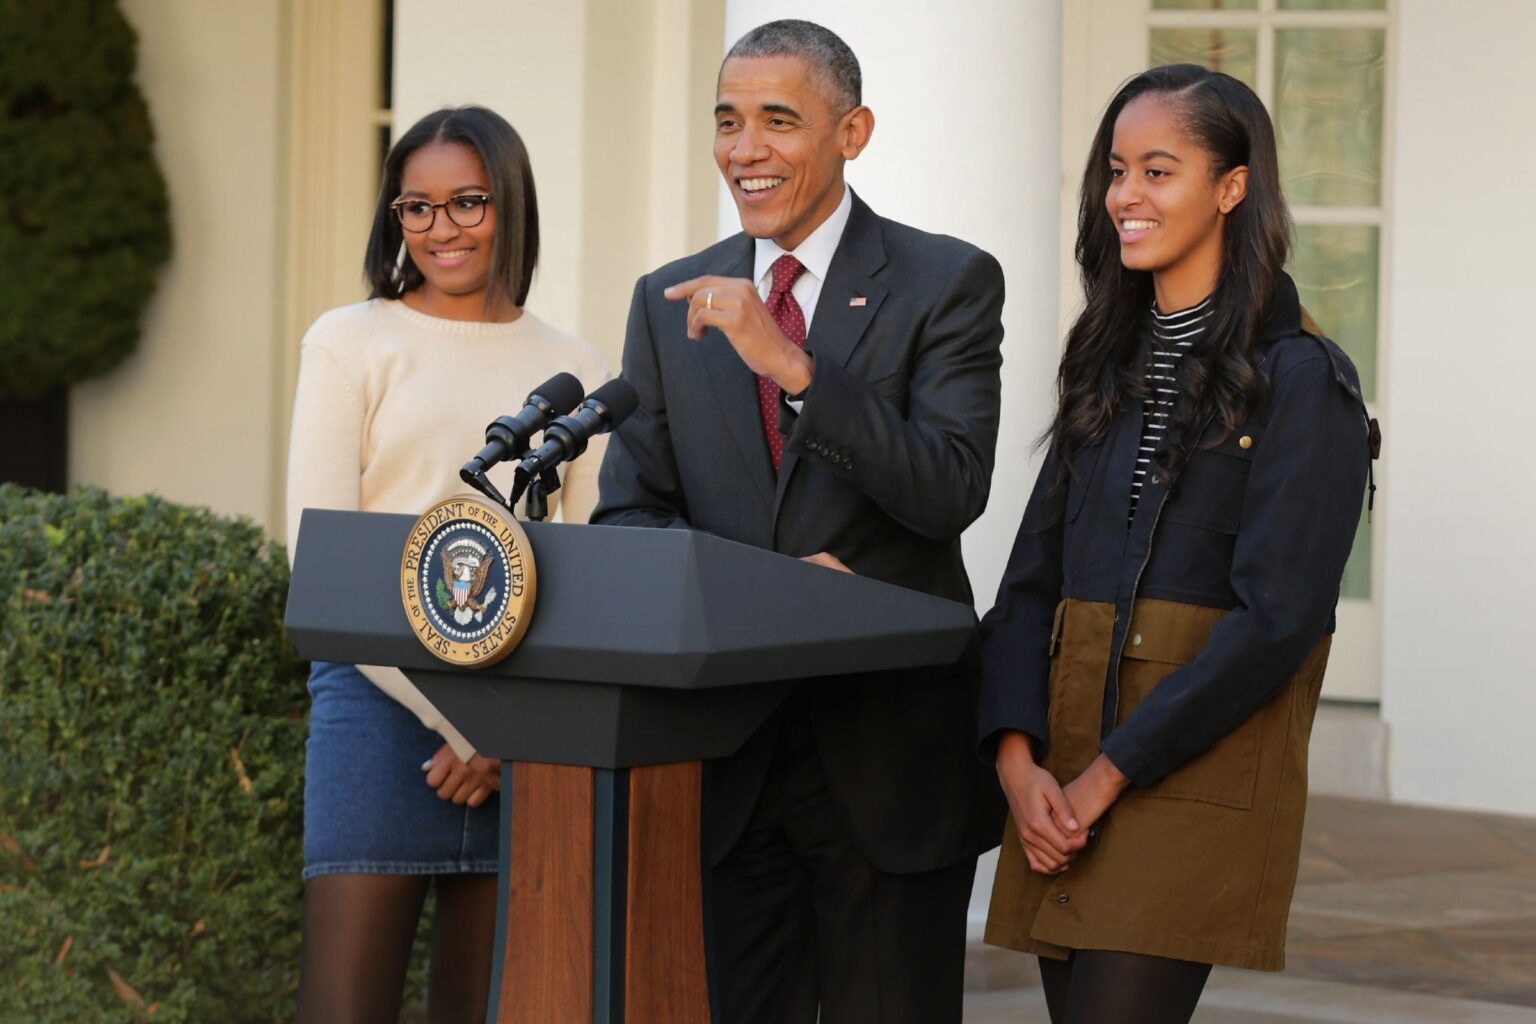 What has the Obama family been doing during quarantine? Check out what the former president's daughters are up to.